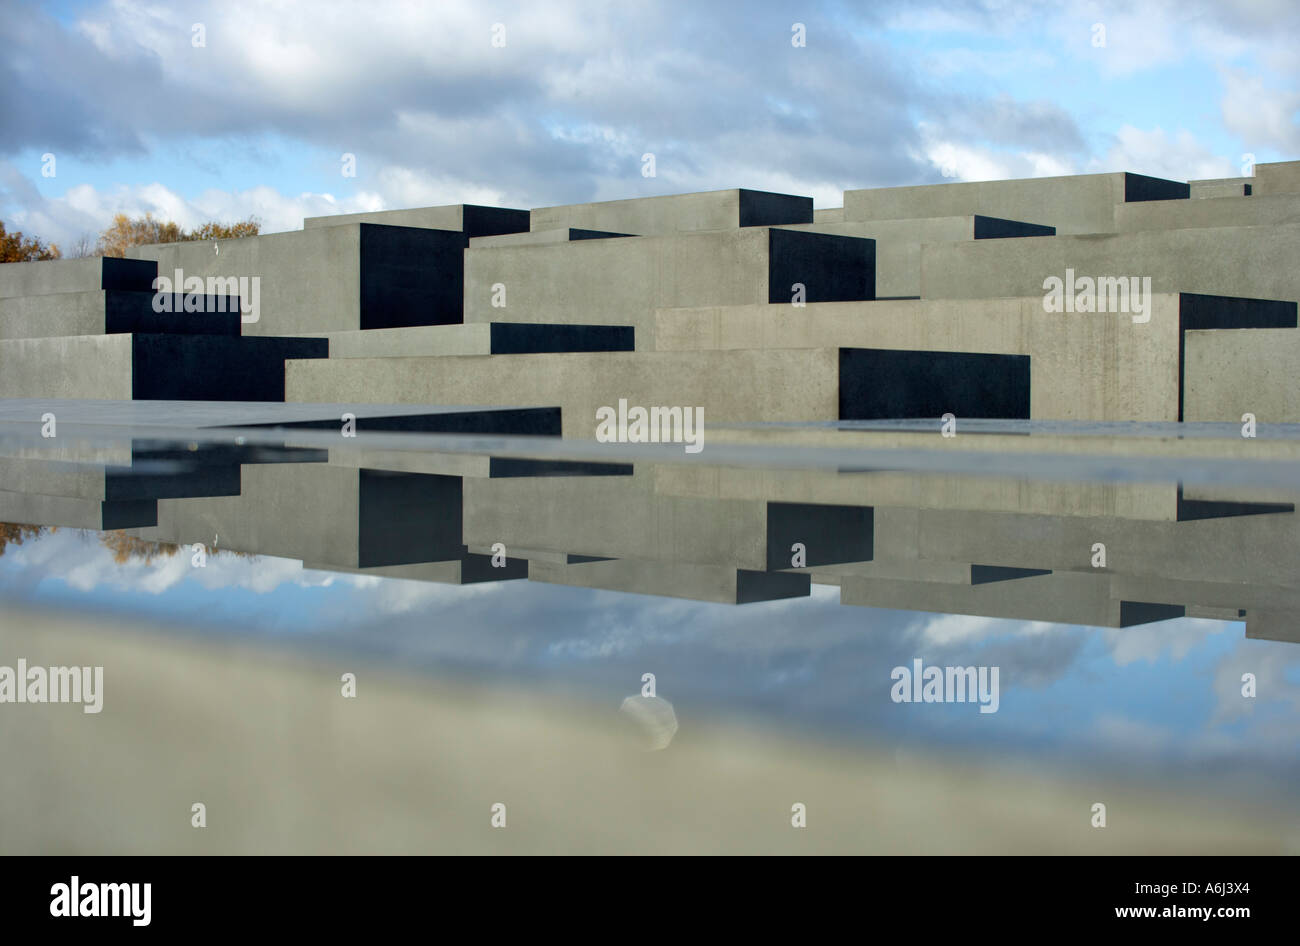 Reflection of the Stele of the Holocaust memorial in a water surface on a concrete stele, Berlin, Germany. Stock Photo